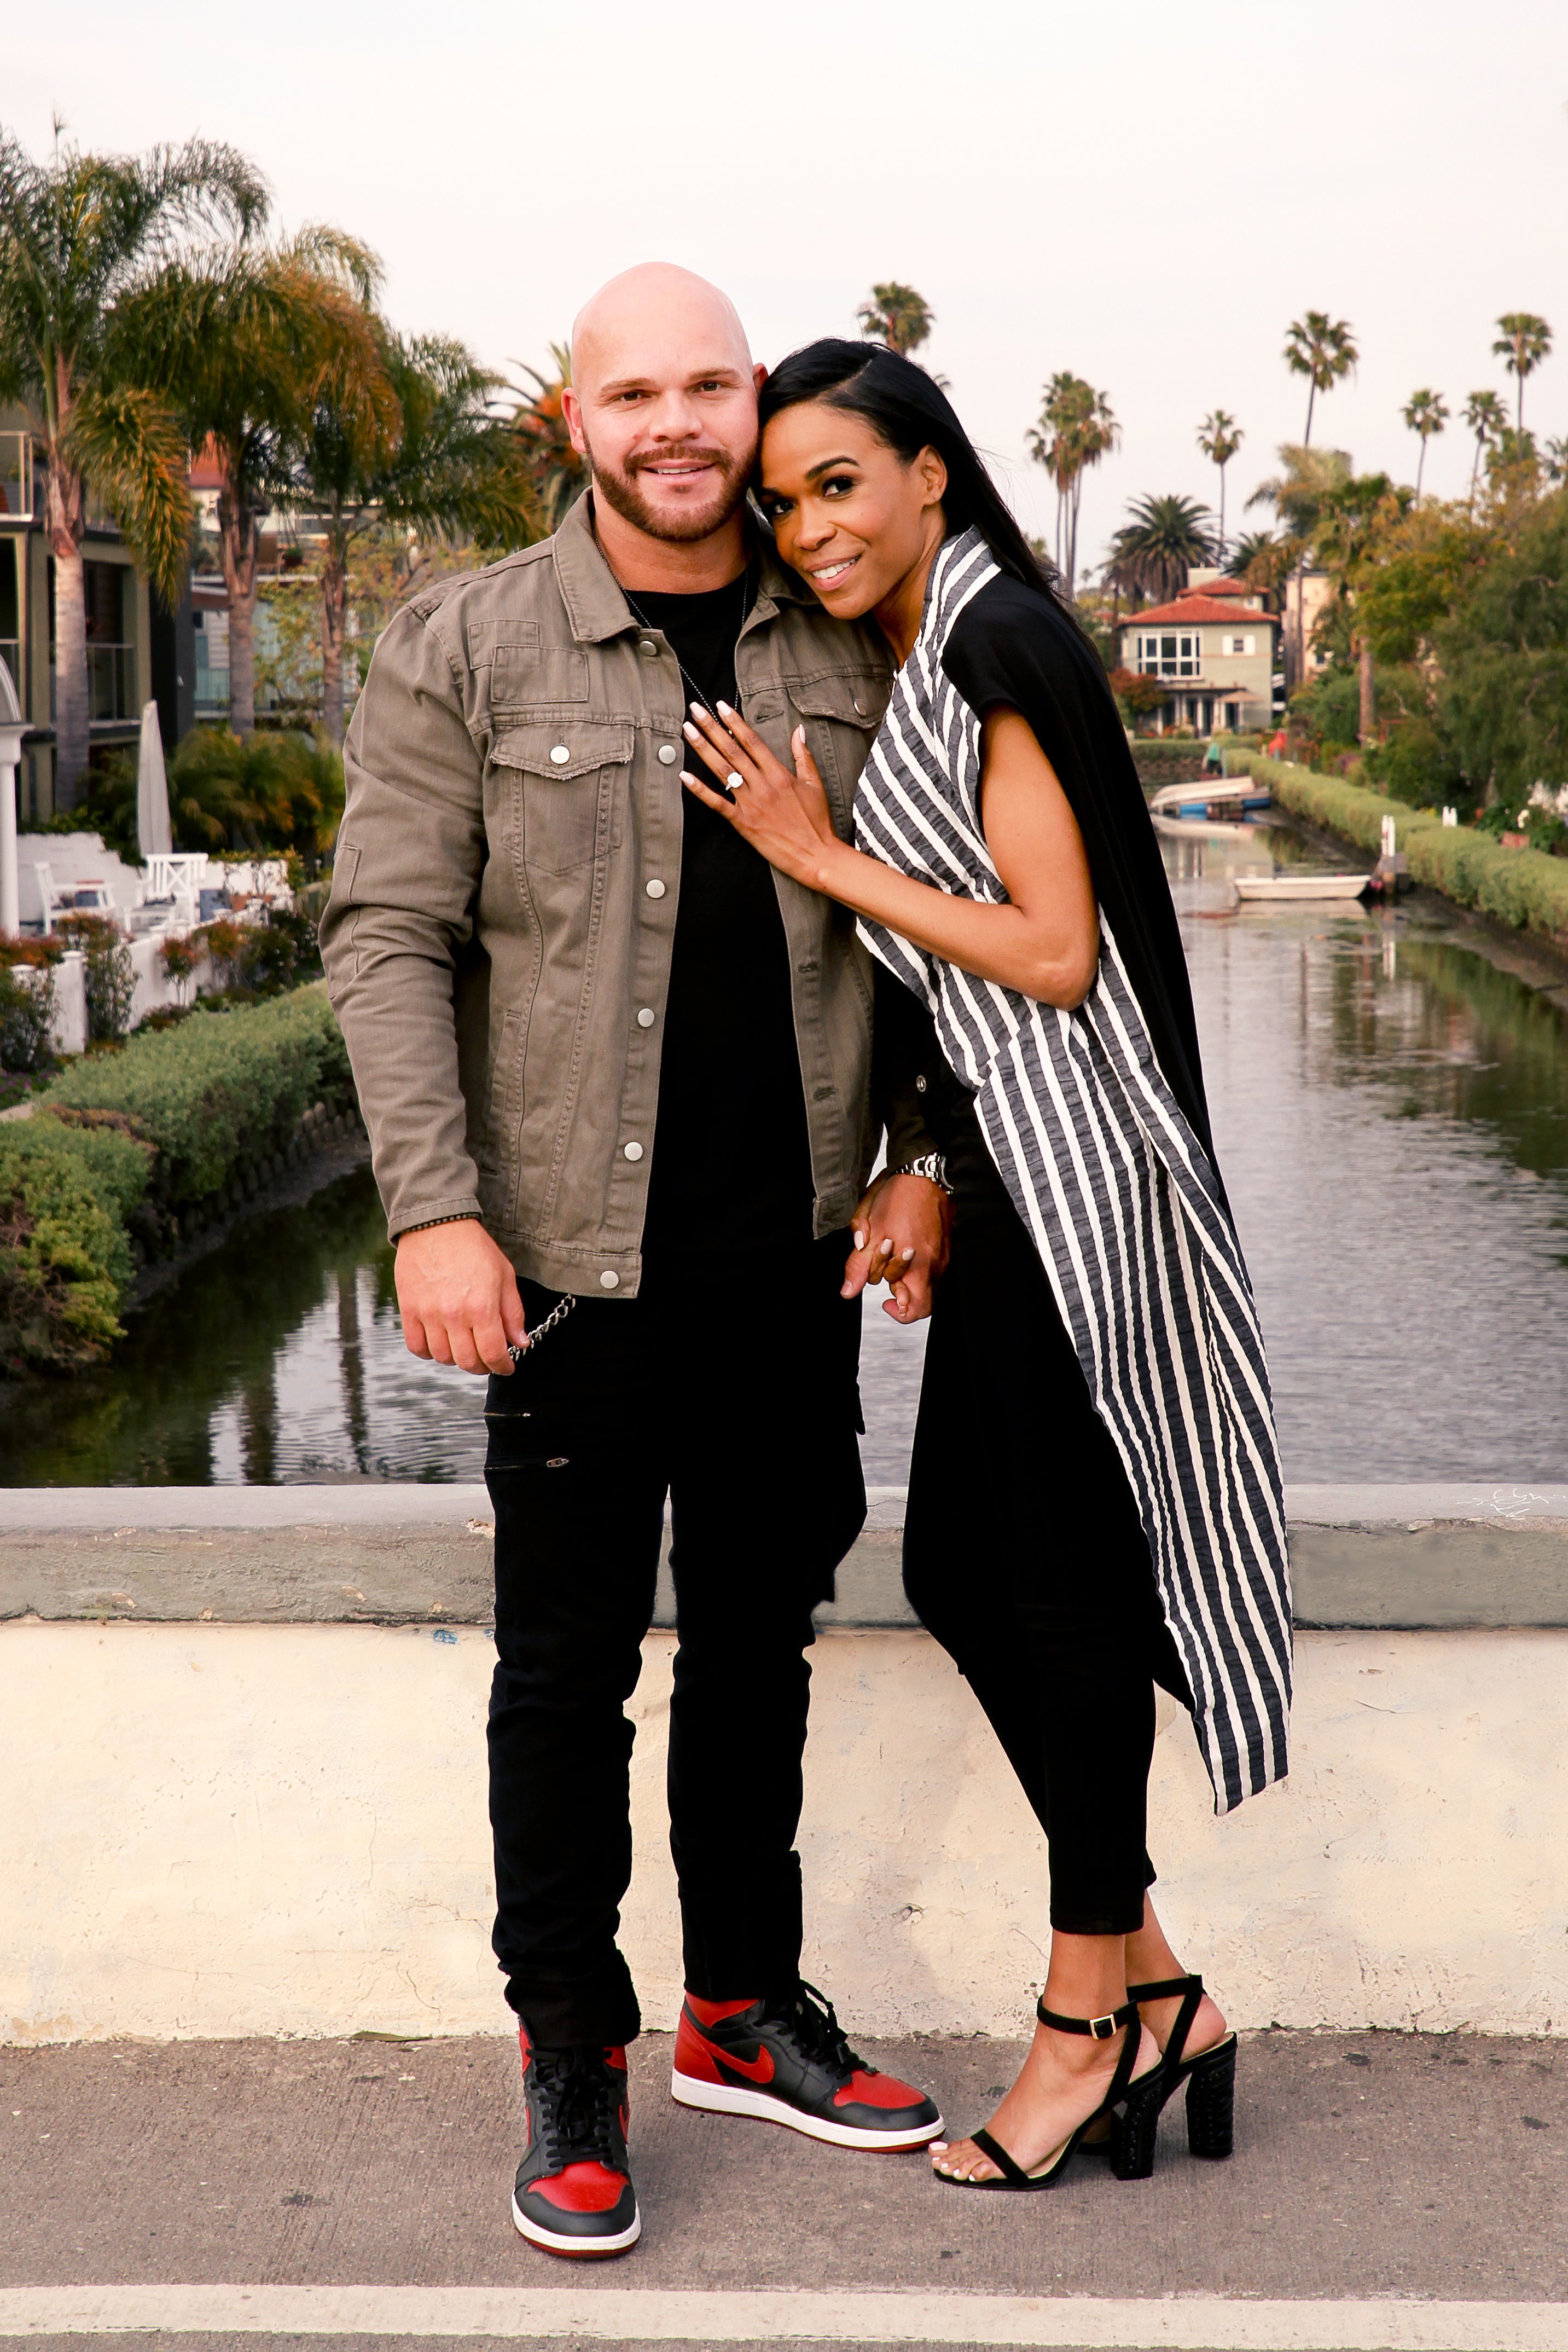 Exclusive: Michelle Williams And Her Fiancé Chad Johnson's Super Sweet Engagement Photos
